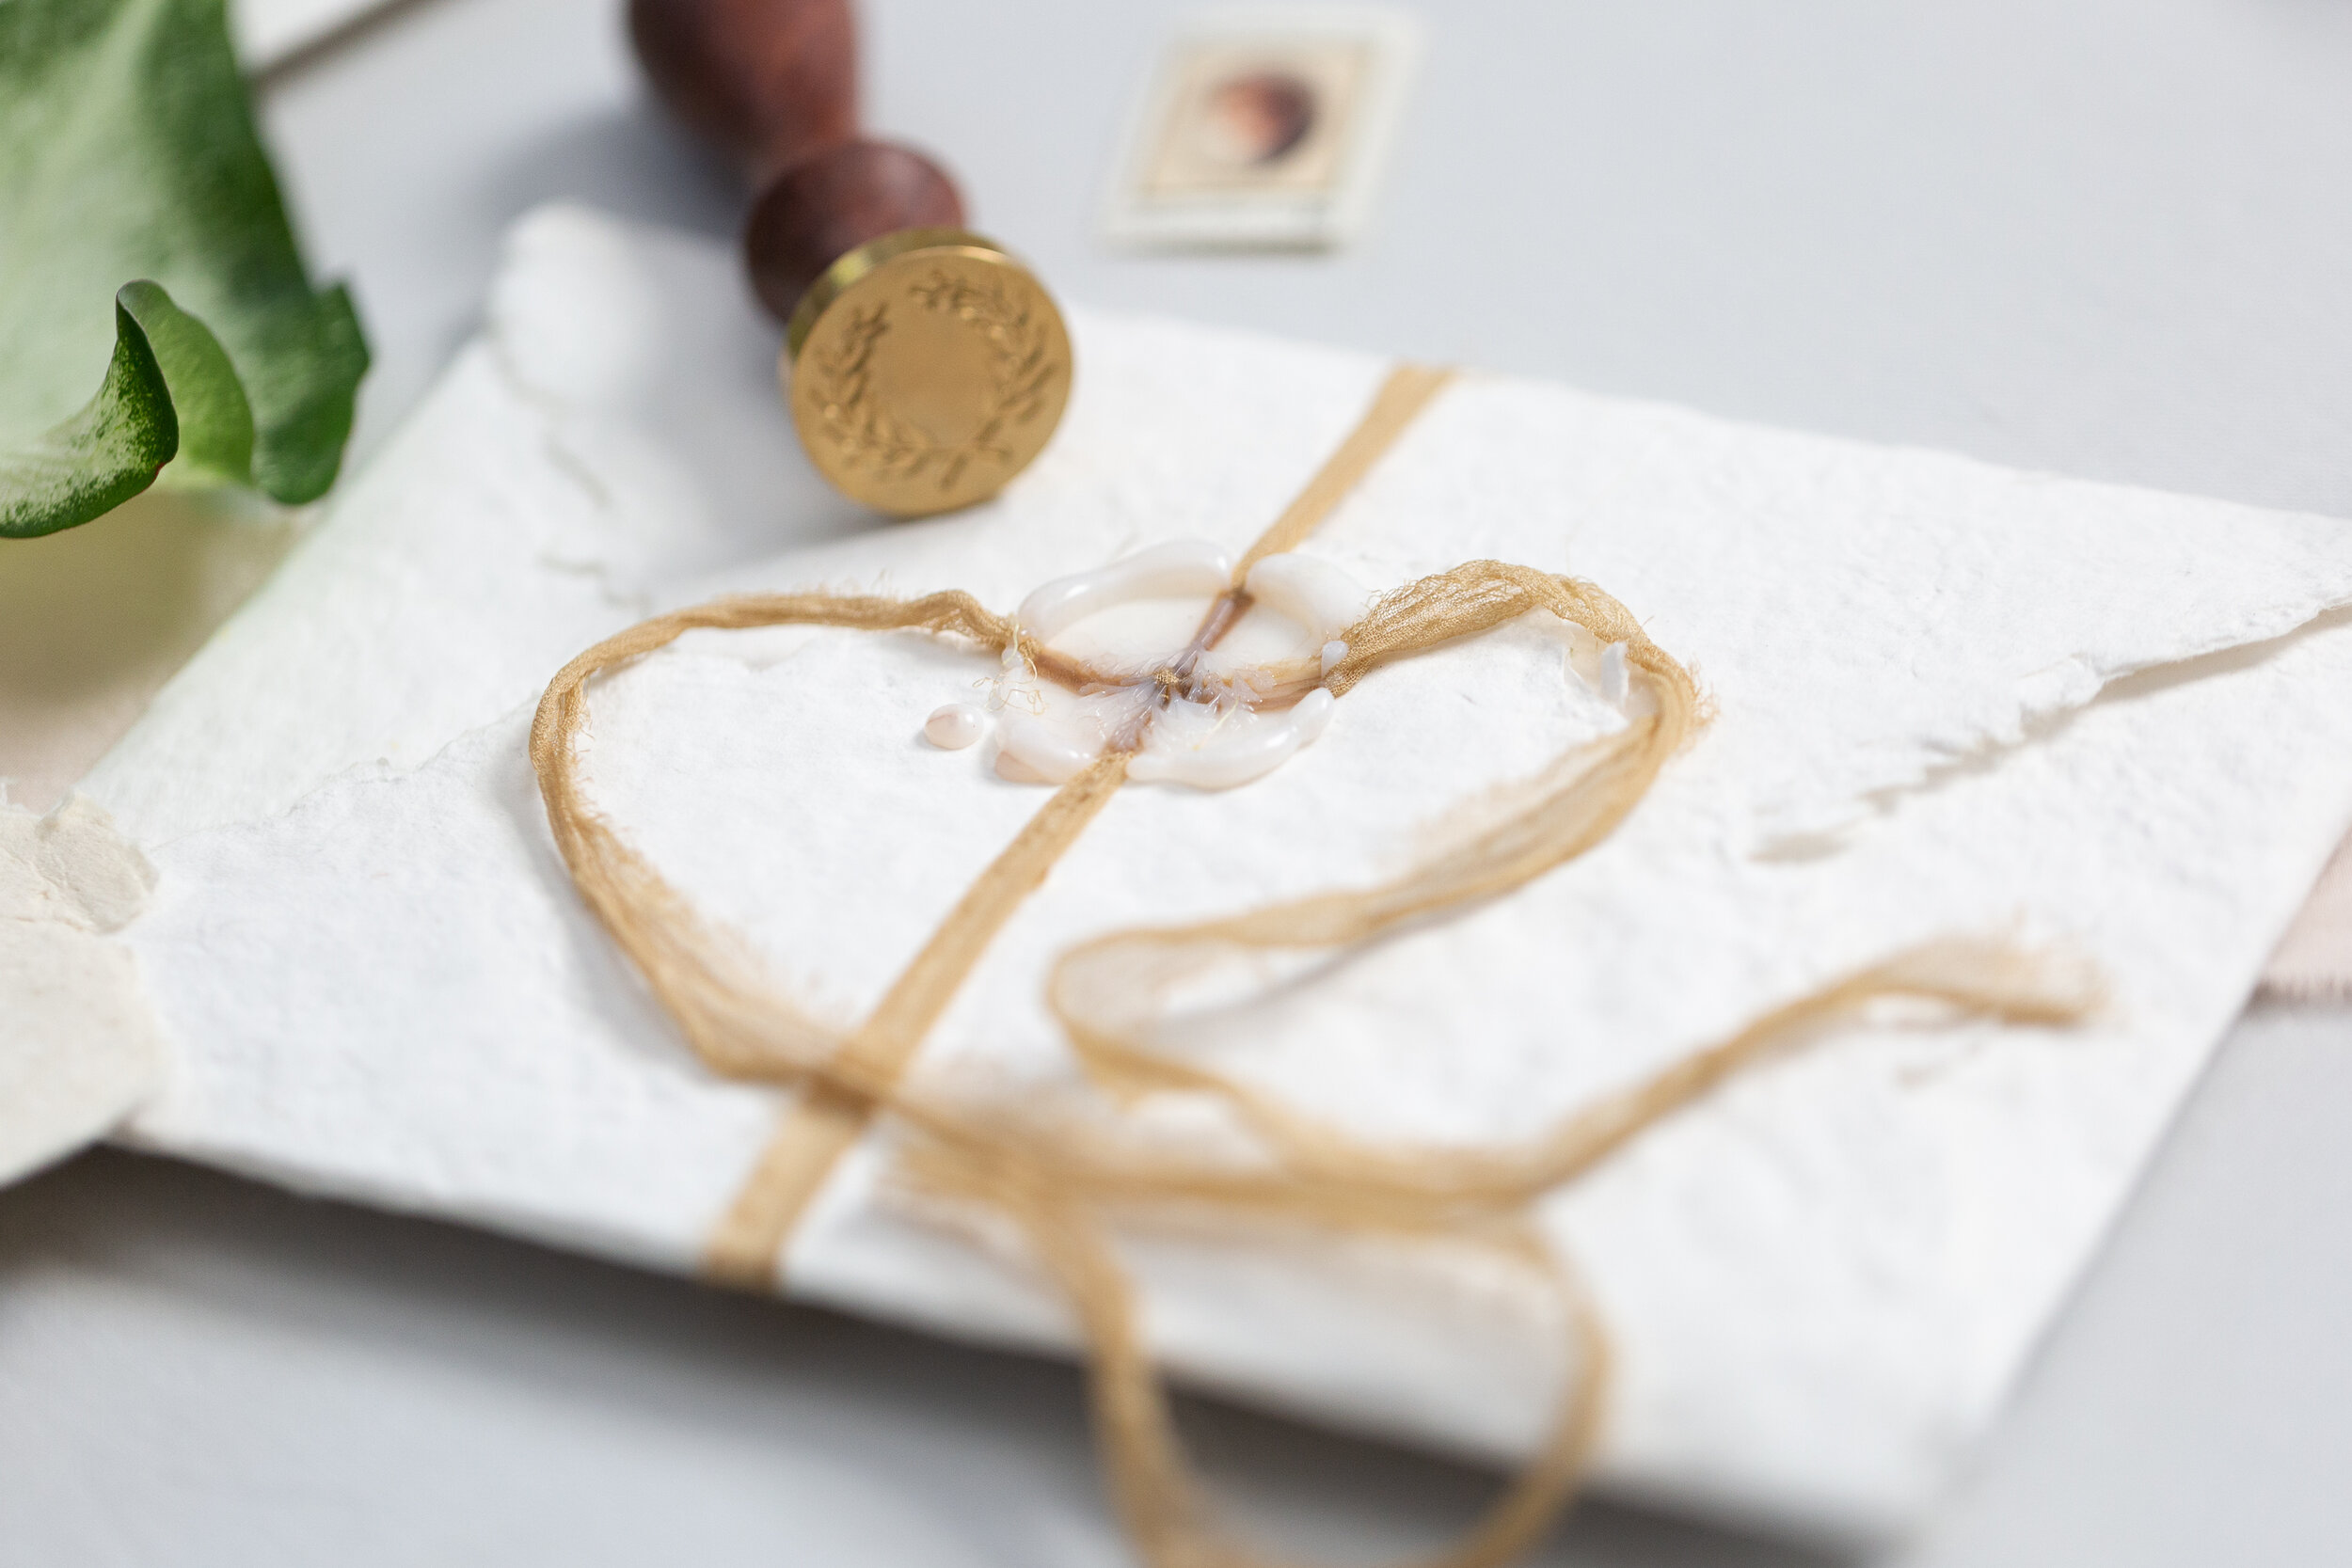 The Beauty is In the Details: Preparing Your Wedding Details to be Photographed